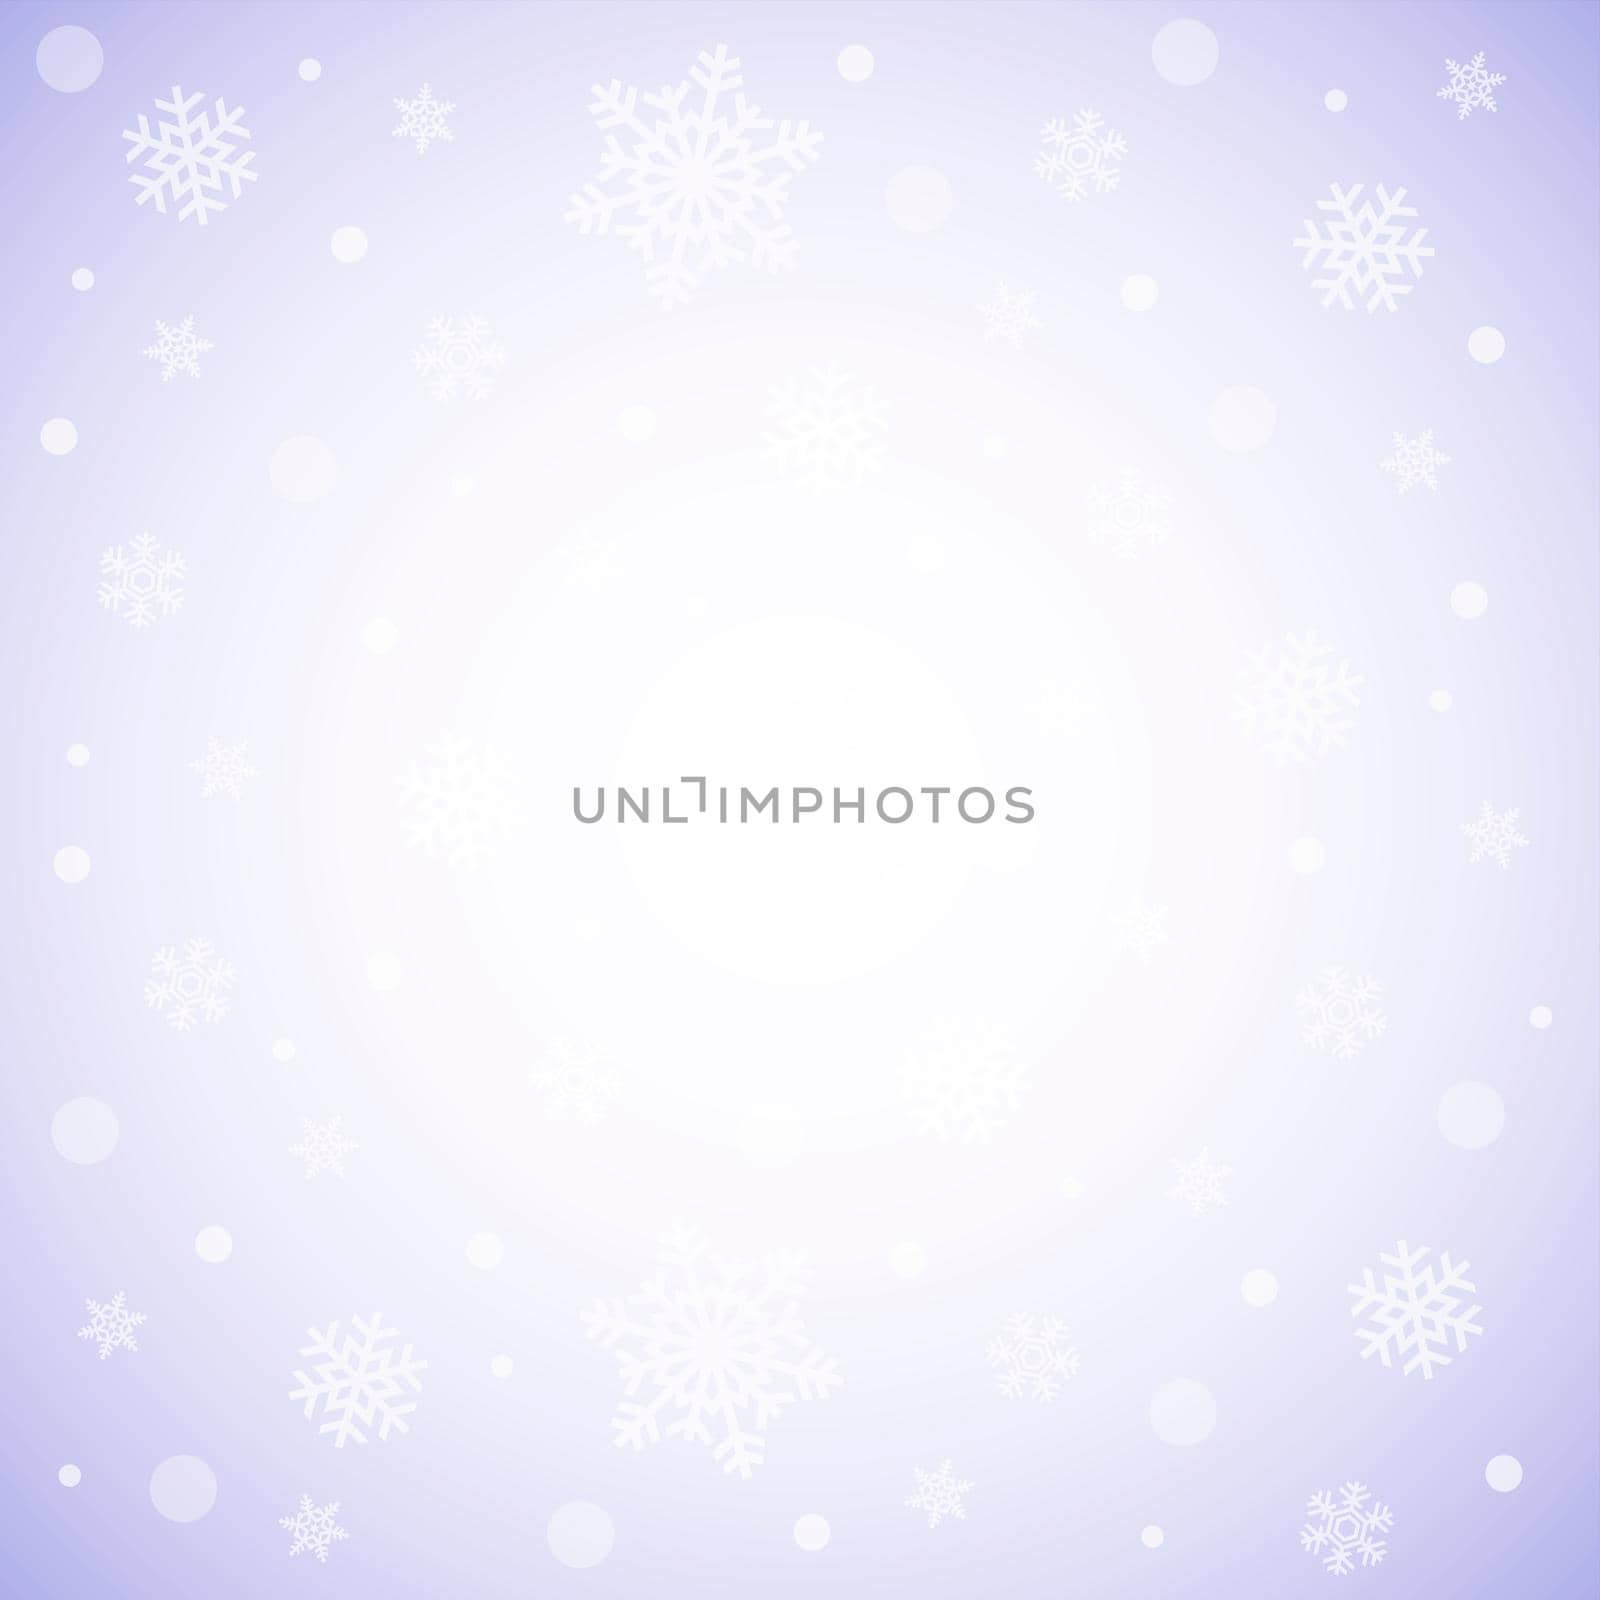 Delicate sky background with falling snowflakes - illustration by BEMPhoto